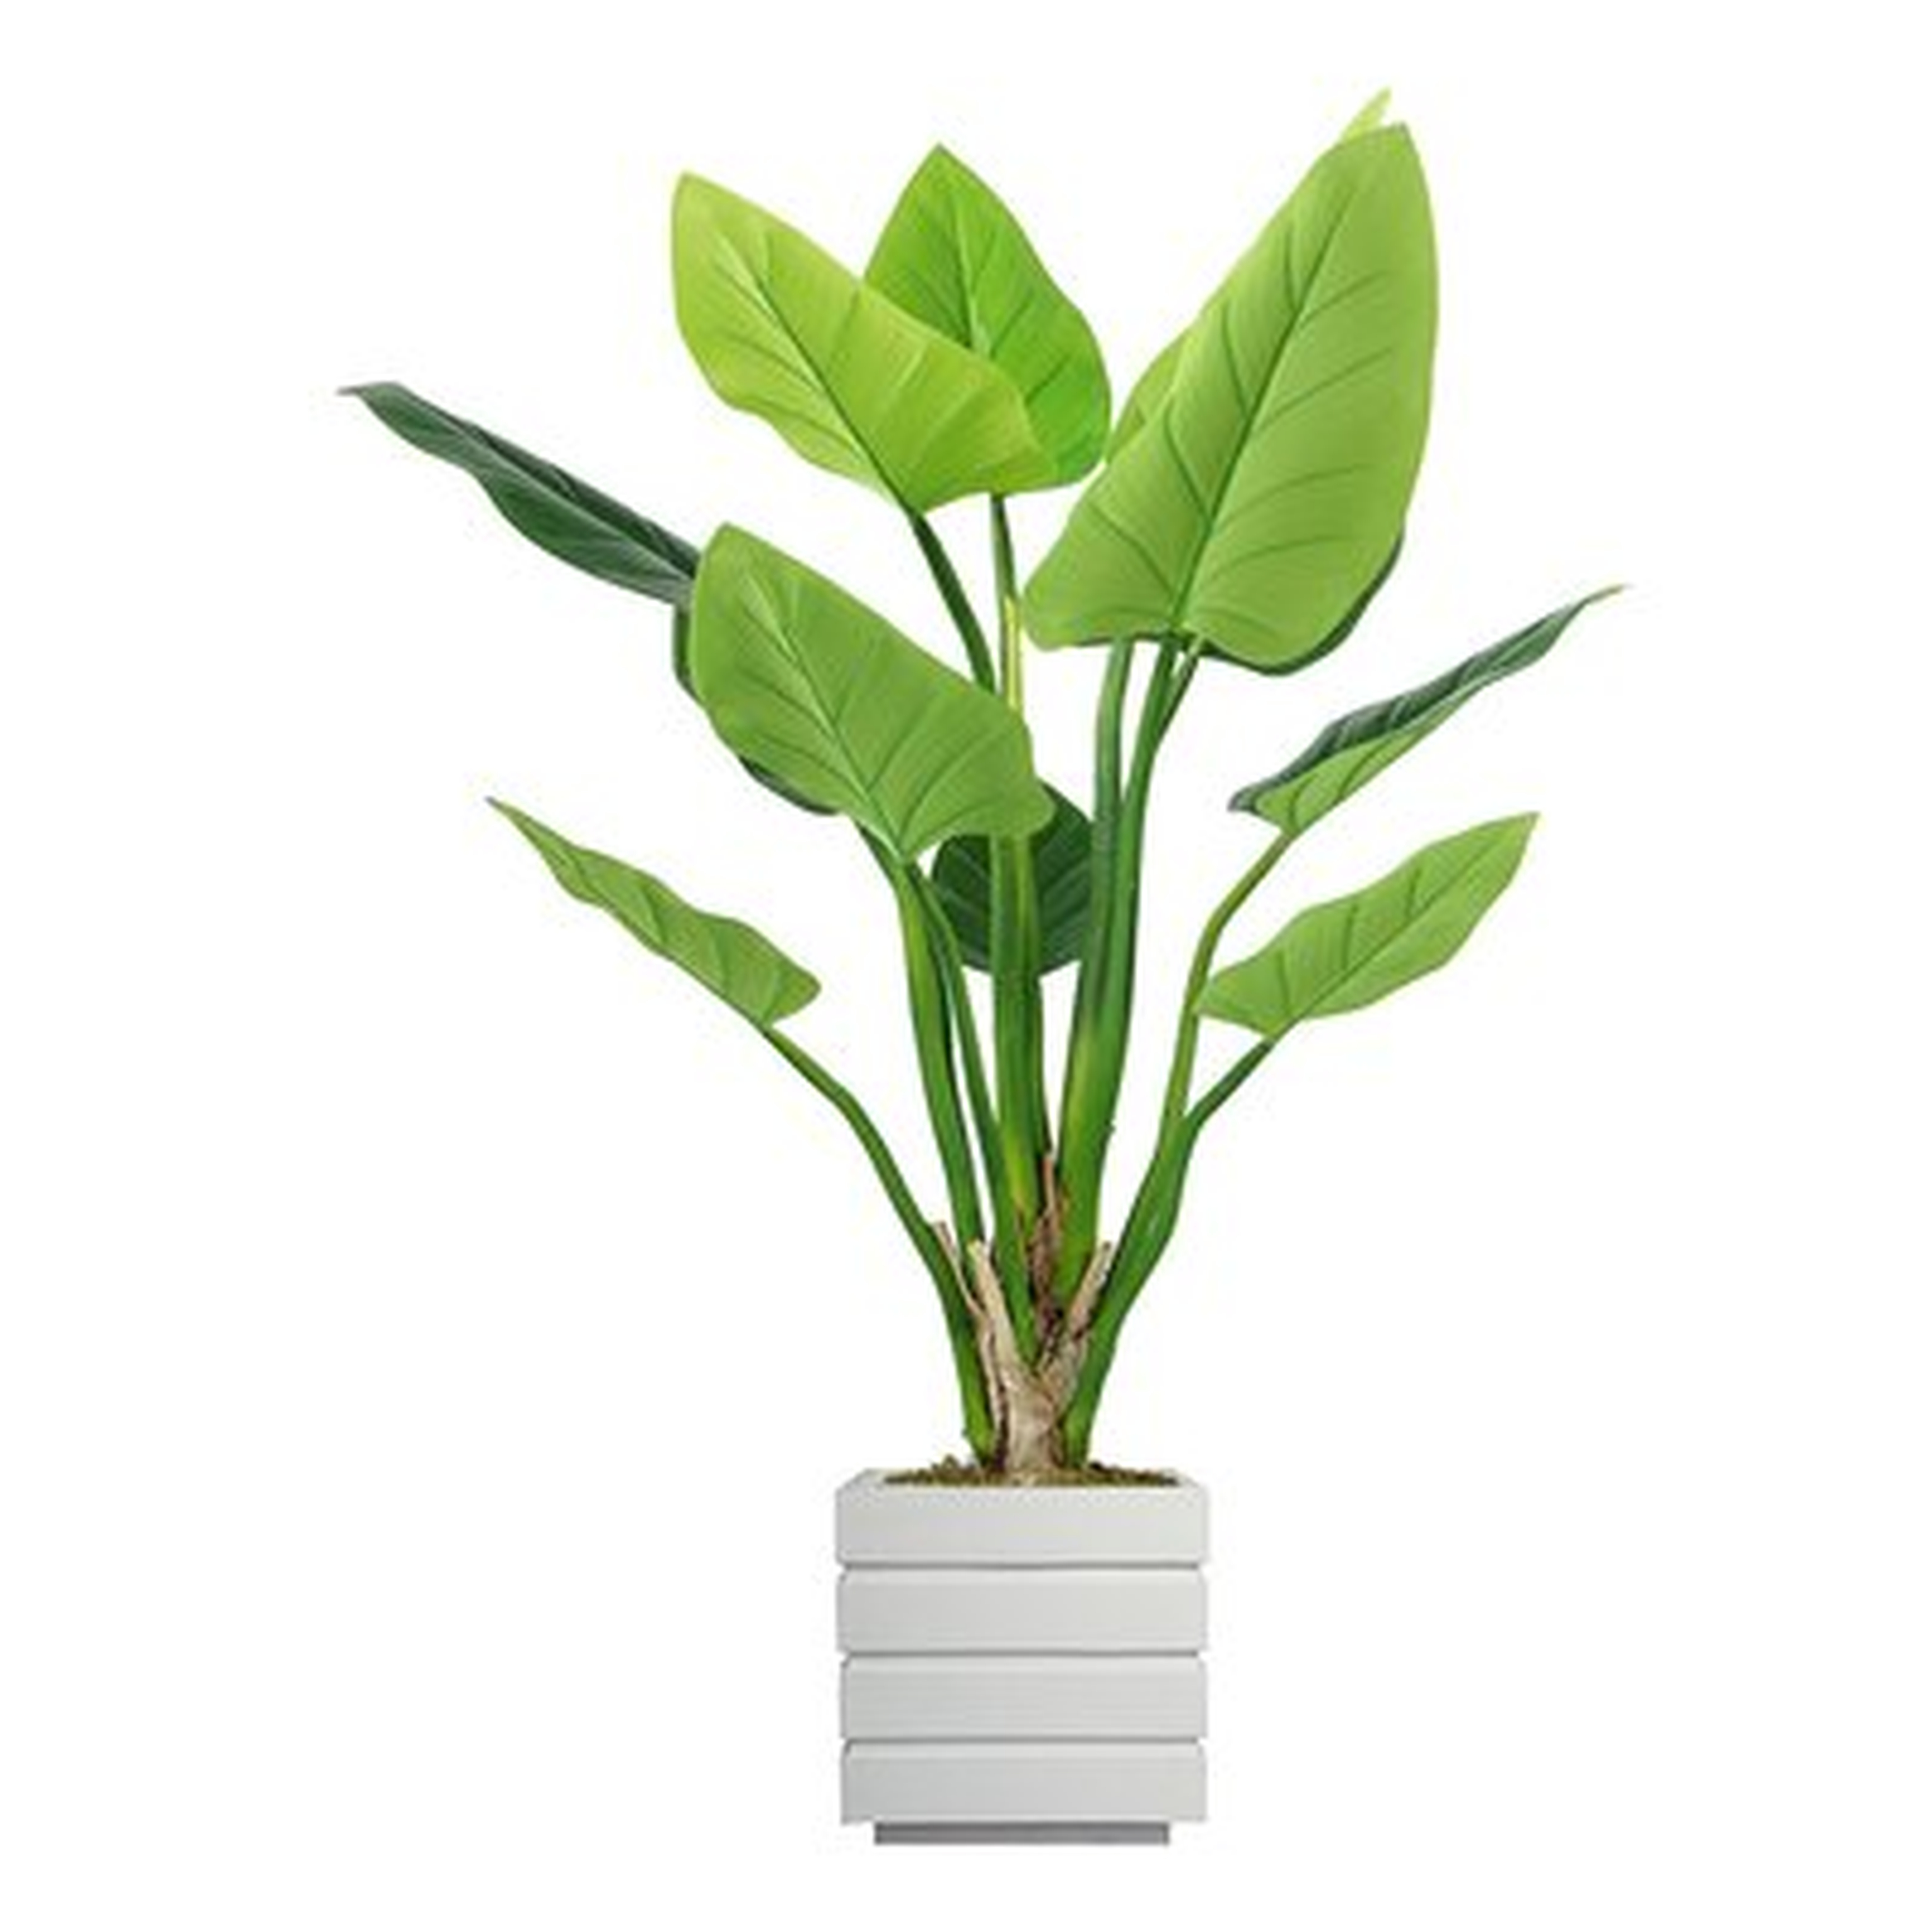 Philodendron Plant in Planter - Wayfair